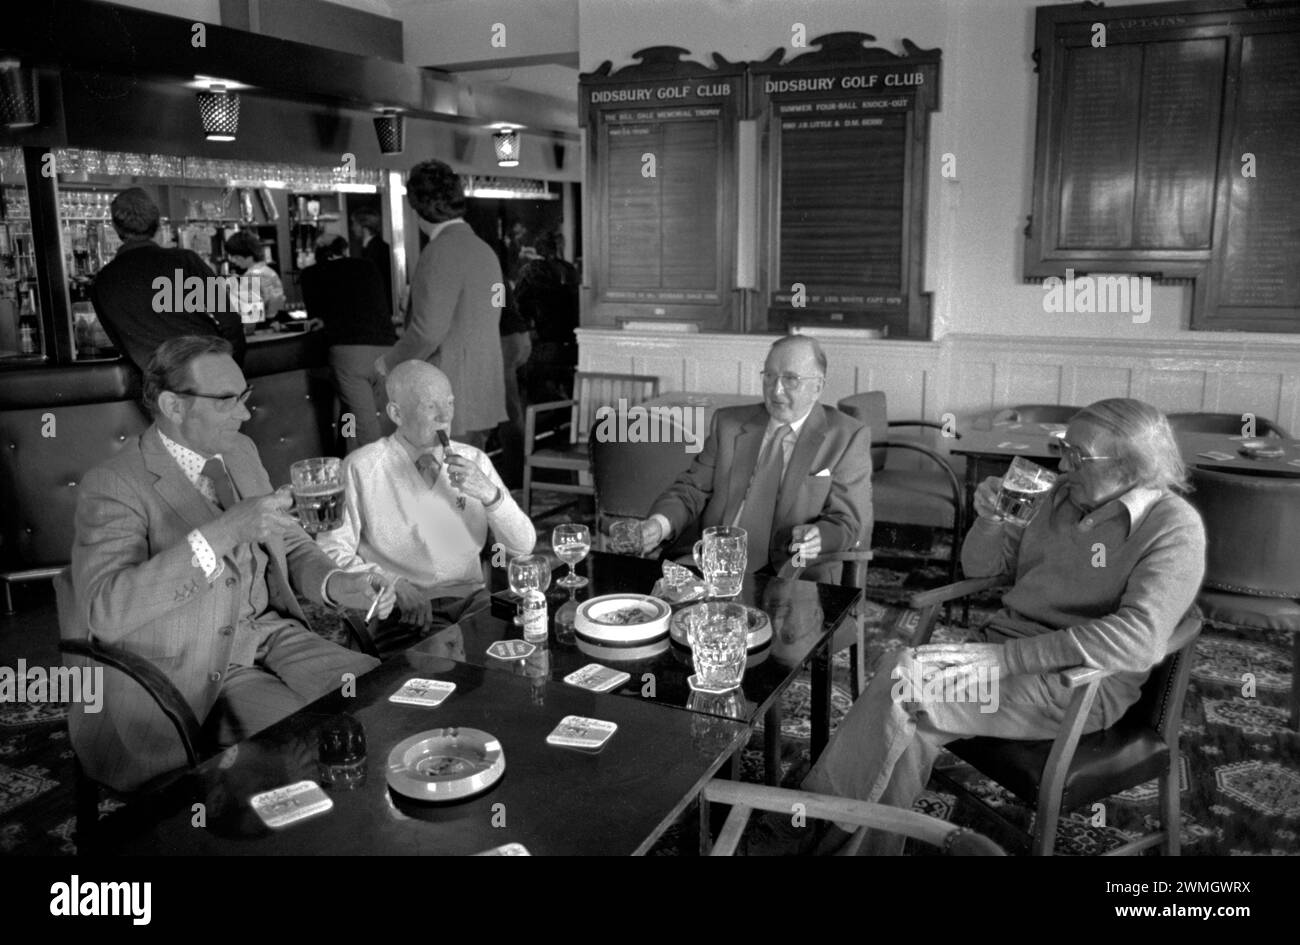 Men at the golf club 1980s UK. Sunday afternoon sitting around drinking pints of beer smoking and chatting in the bar room. Didsbury Golf Club.  Didsbury, Manchester, England UK 1981 HOMER SYKES Stock Photo